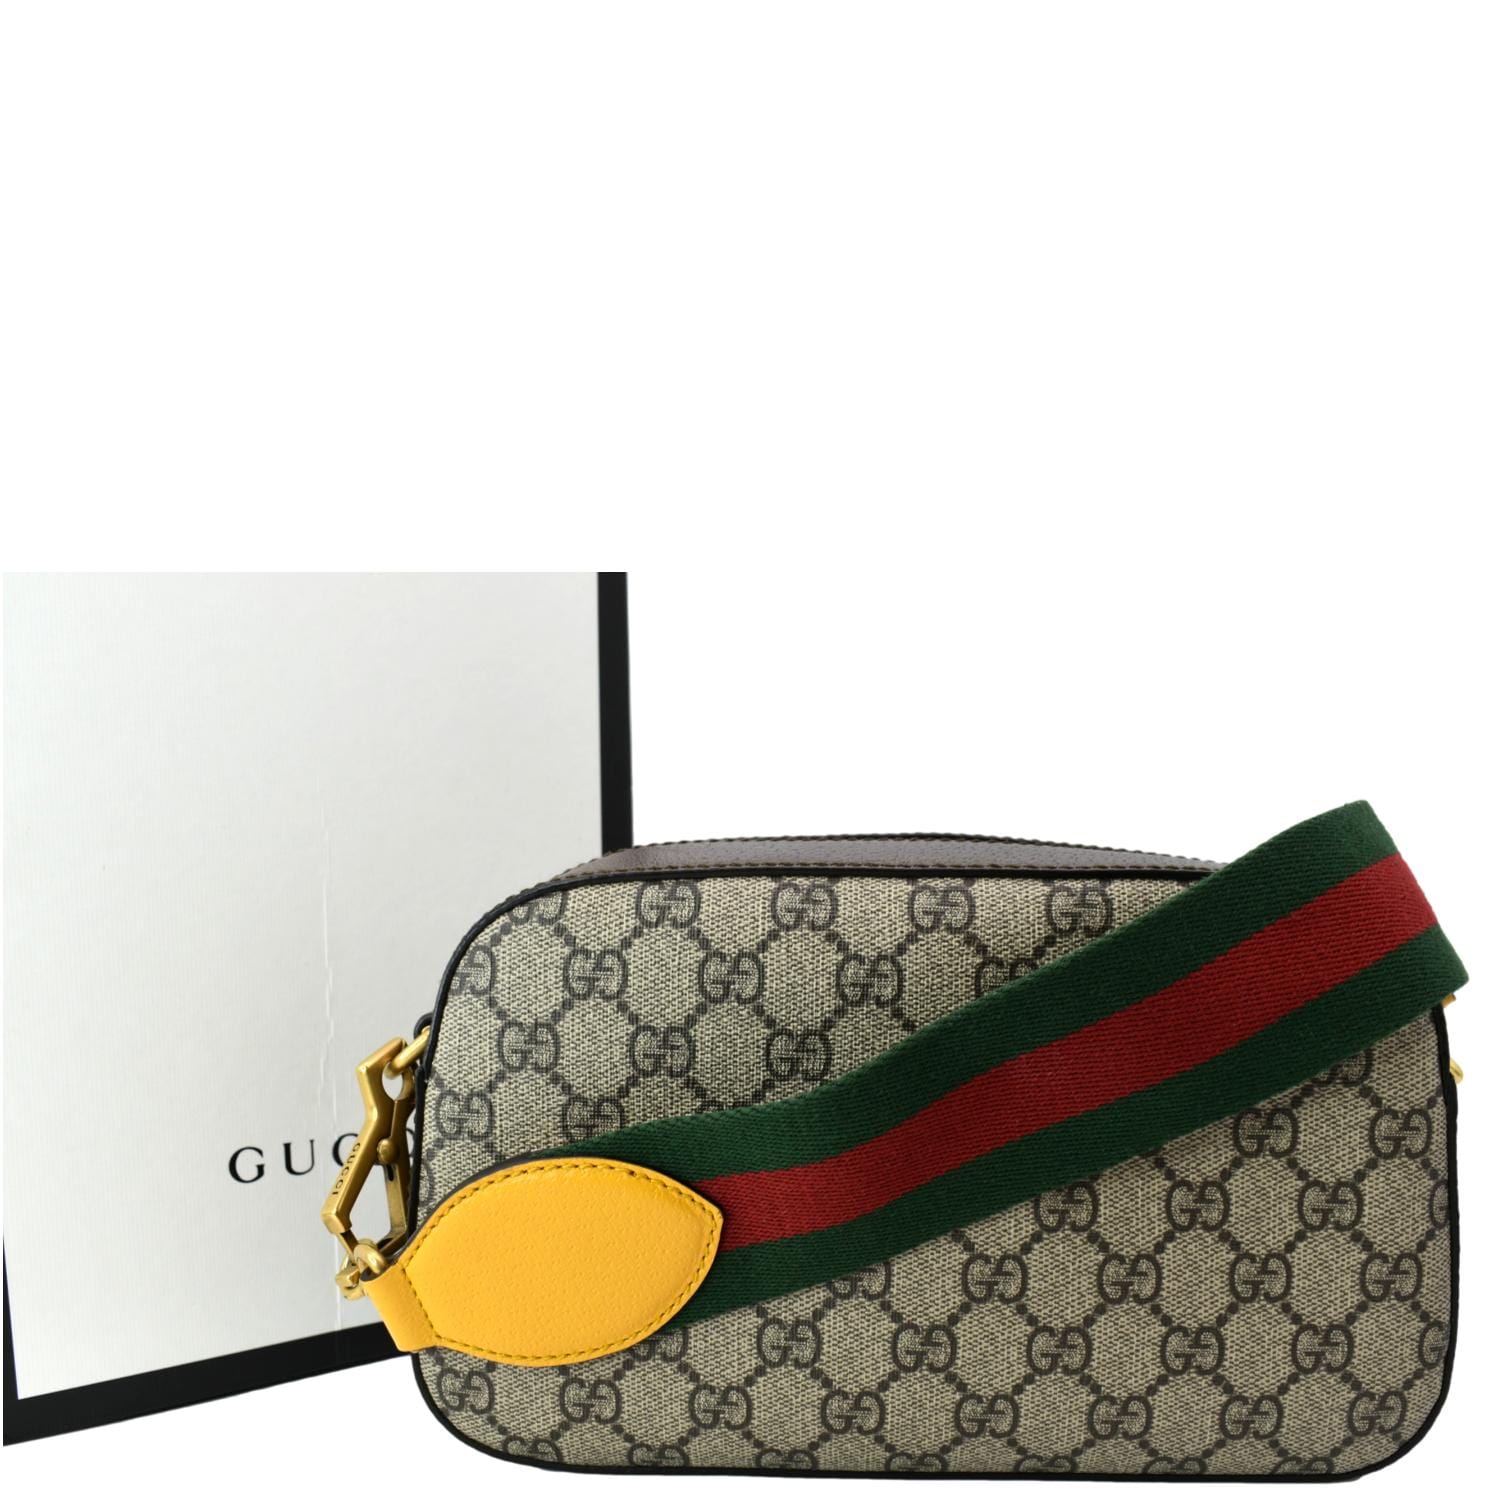 Gucci GG Supreme Clutch Bags for Women, Authenticity Guaranteed